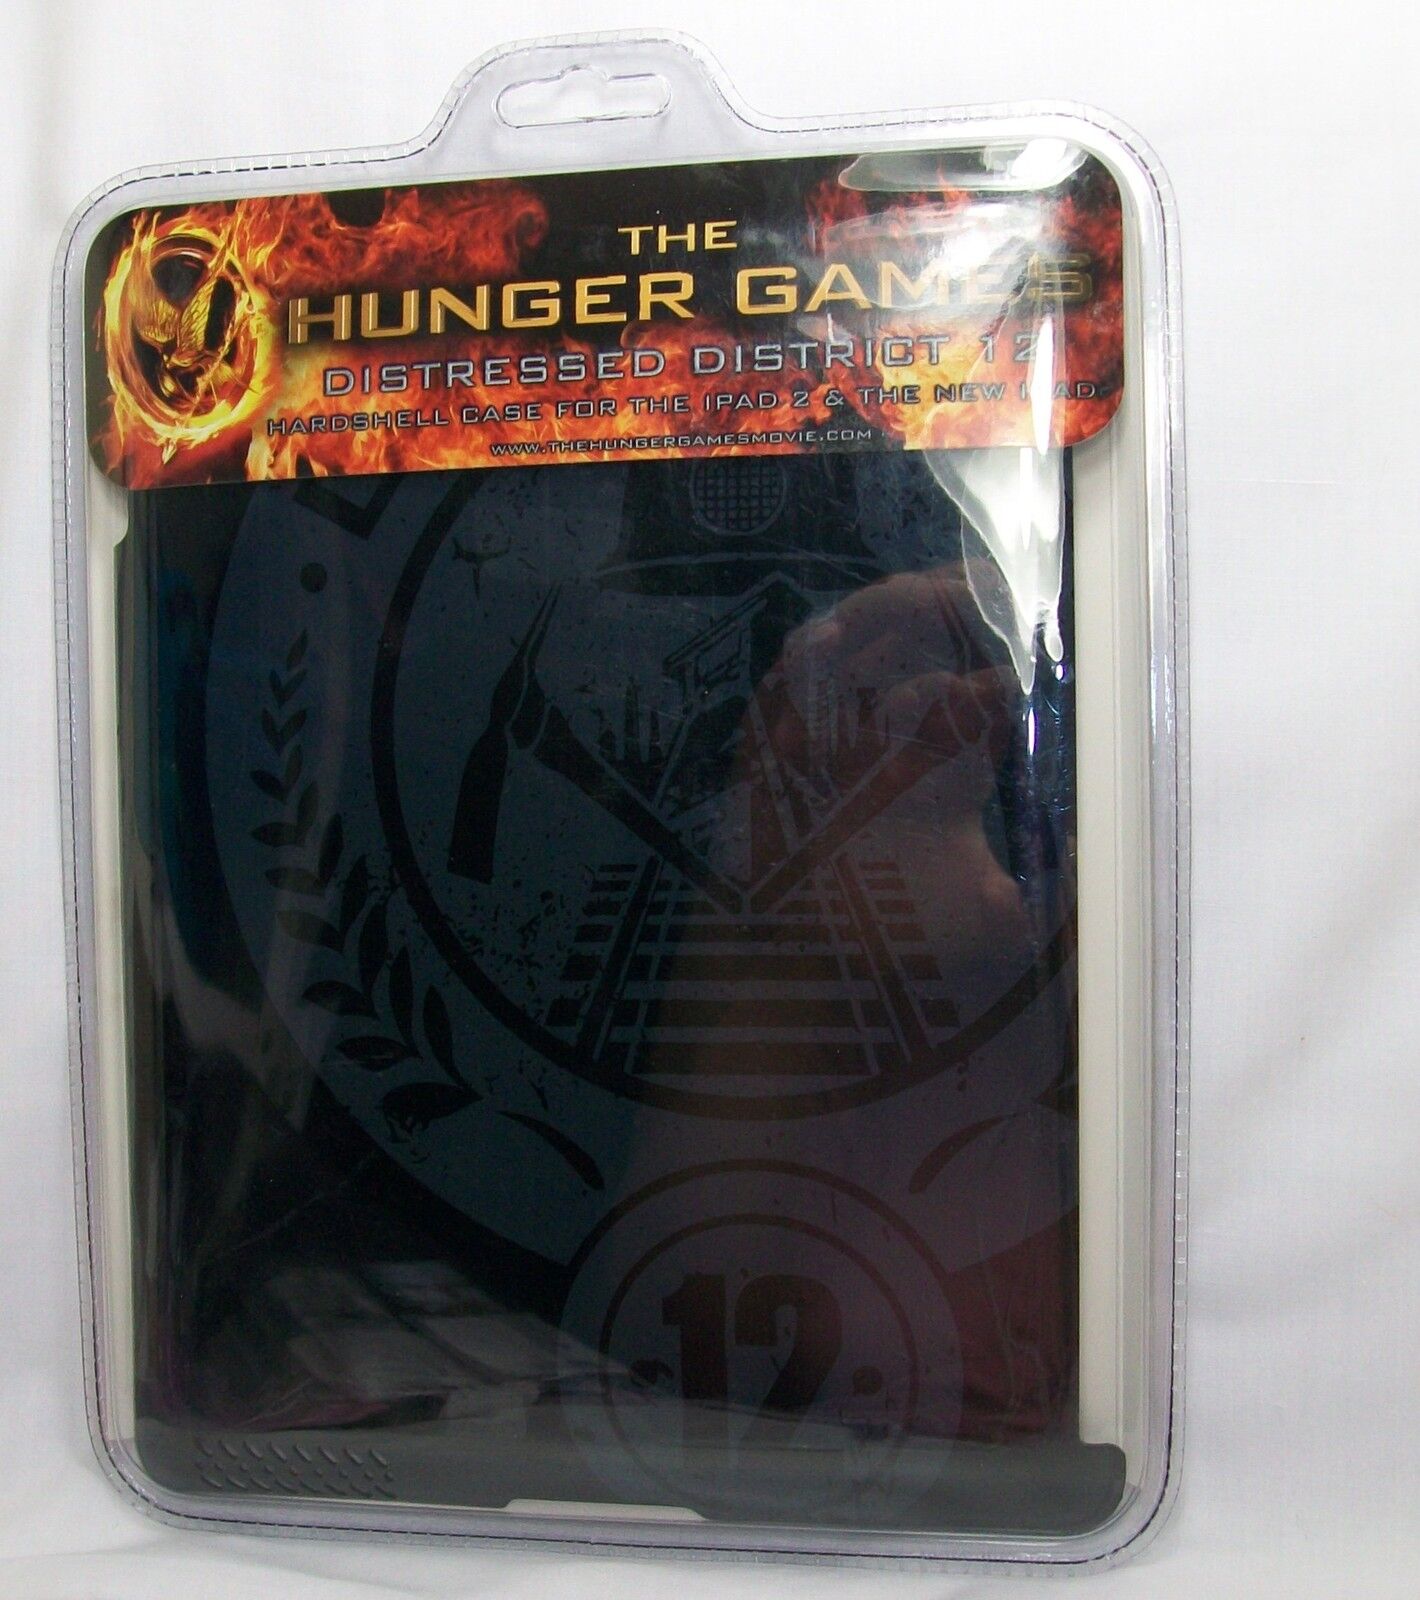 The Hunger Games Hardshell Case Distressed District 12 For iPad 2 & New iPad New